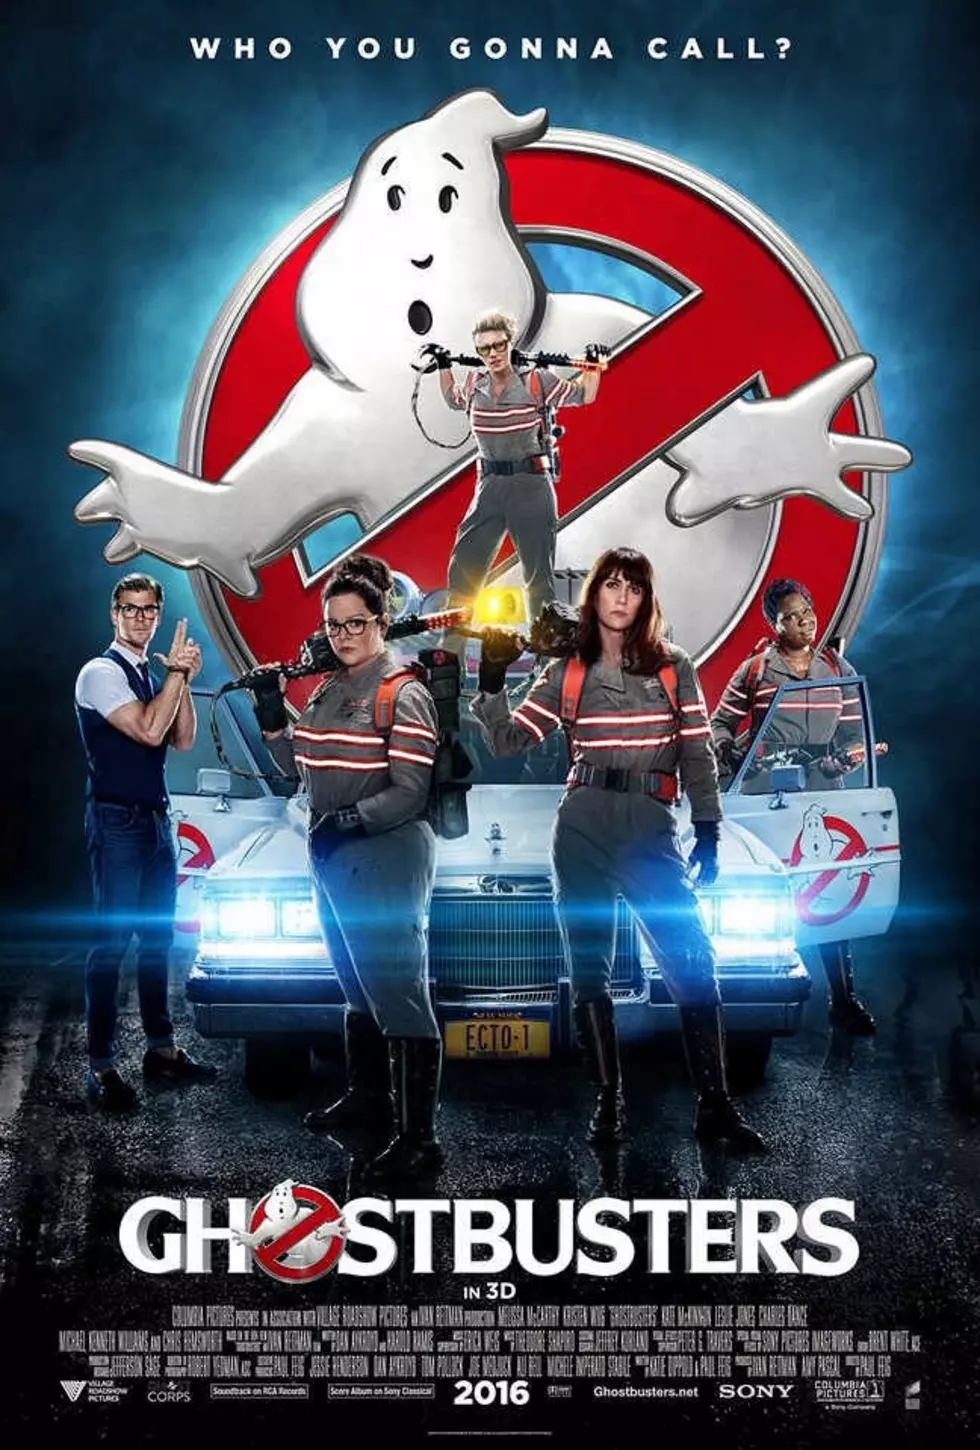 New ‘Ghostbusters’ Theme Released!